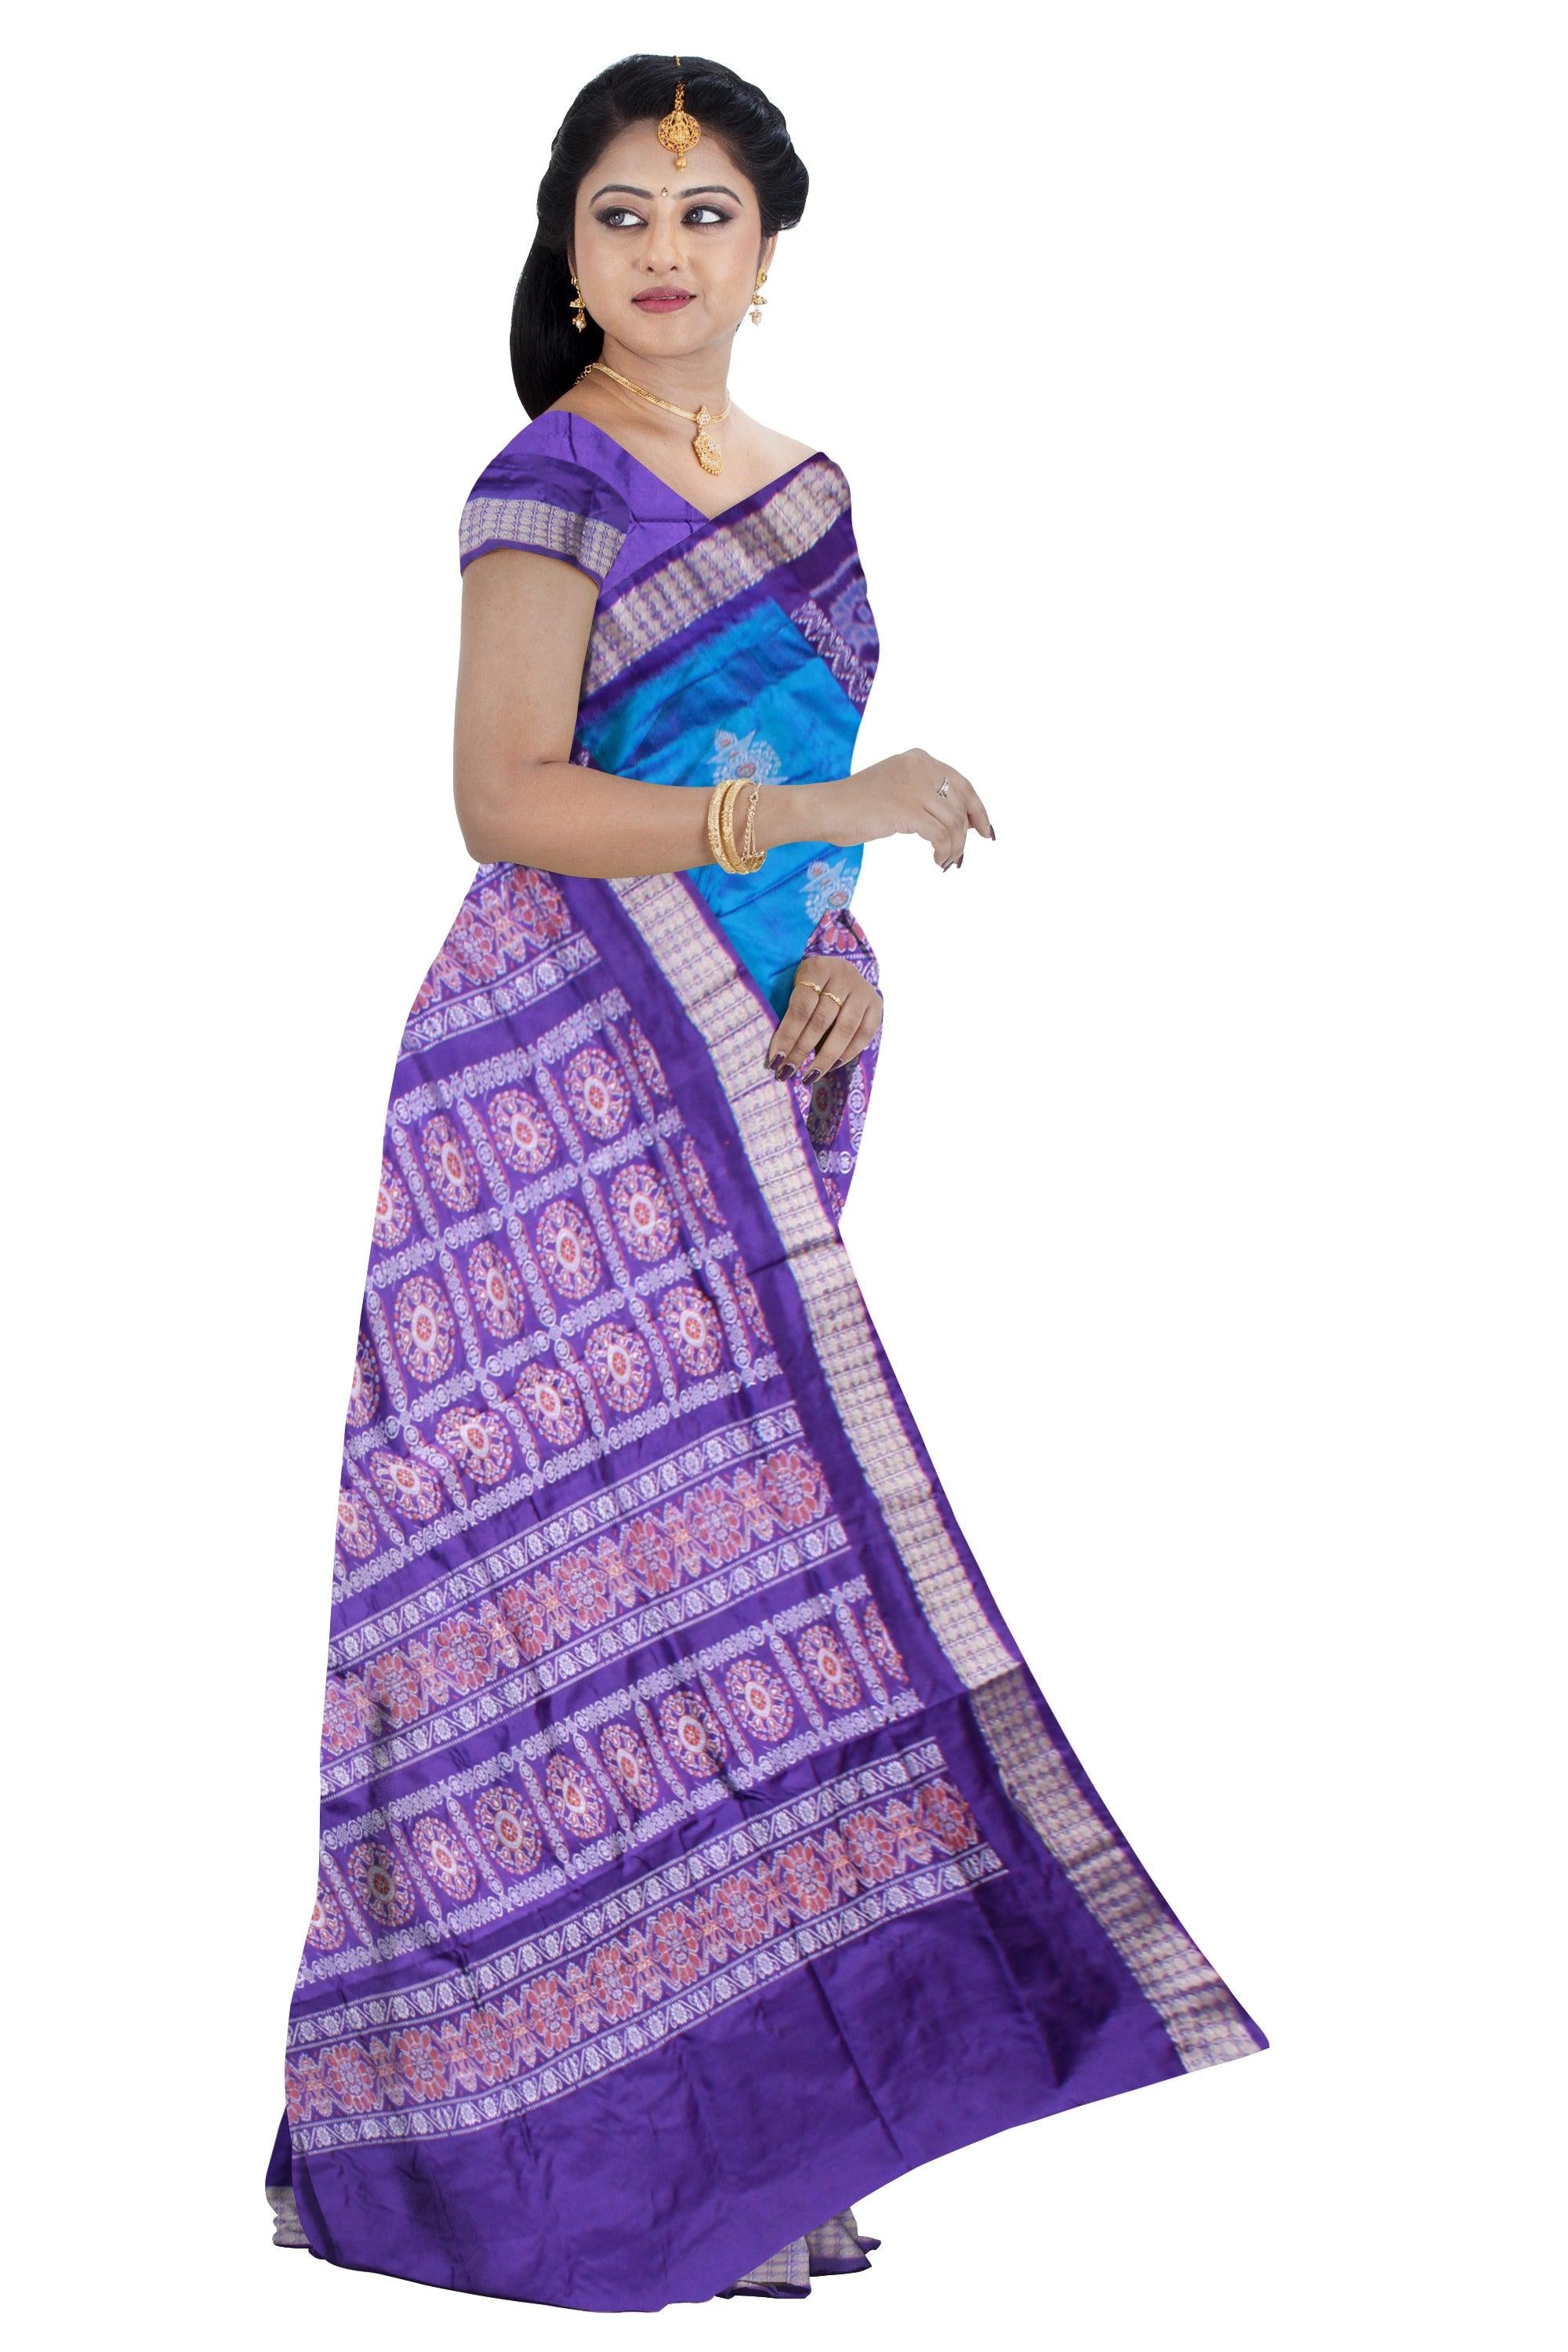 LATEST PATLI PATA SAREE IN SKY AND PURPLE COLOR BASE, ATTACHED WITH BLOUSE PIECE. - Koshali Arts & Crafts Enterprise